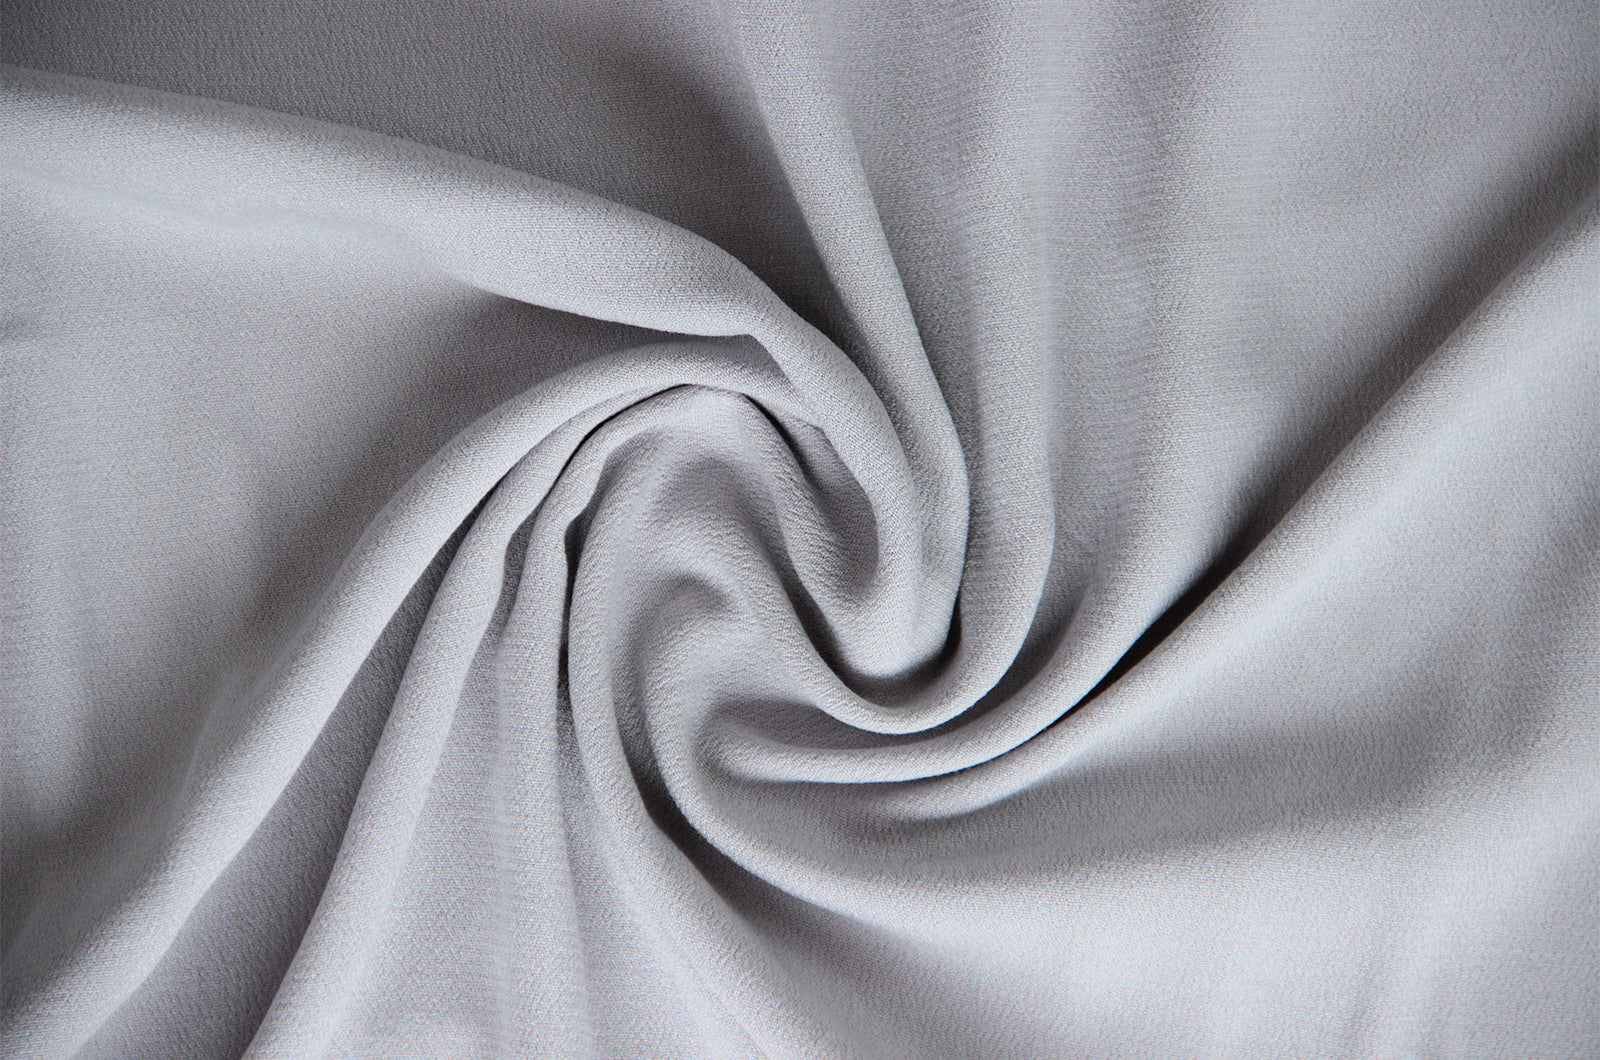 Viscose crepe * From 50 cm-26